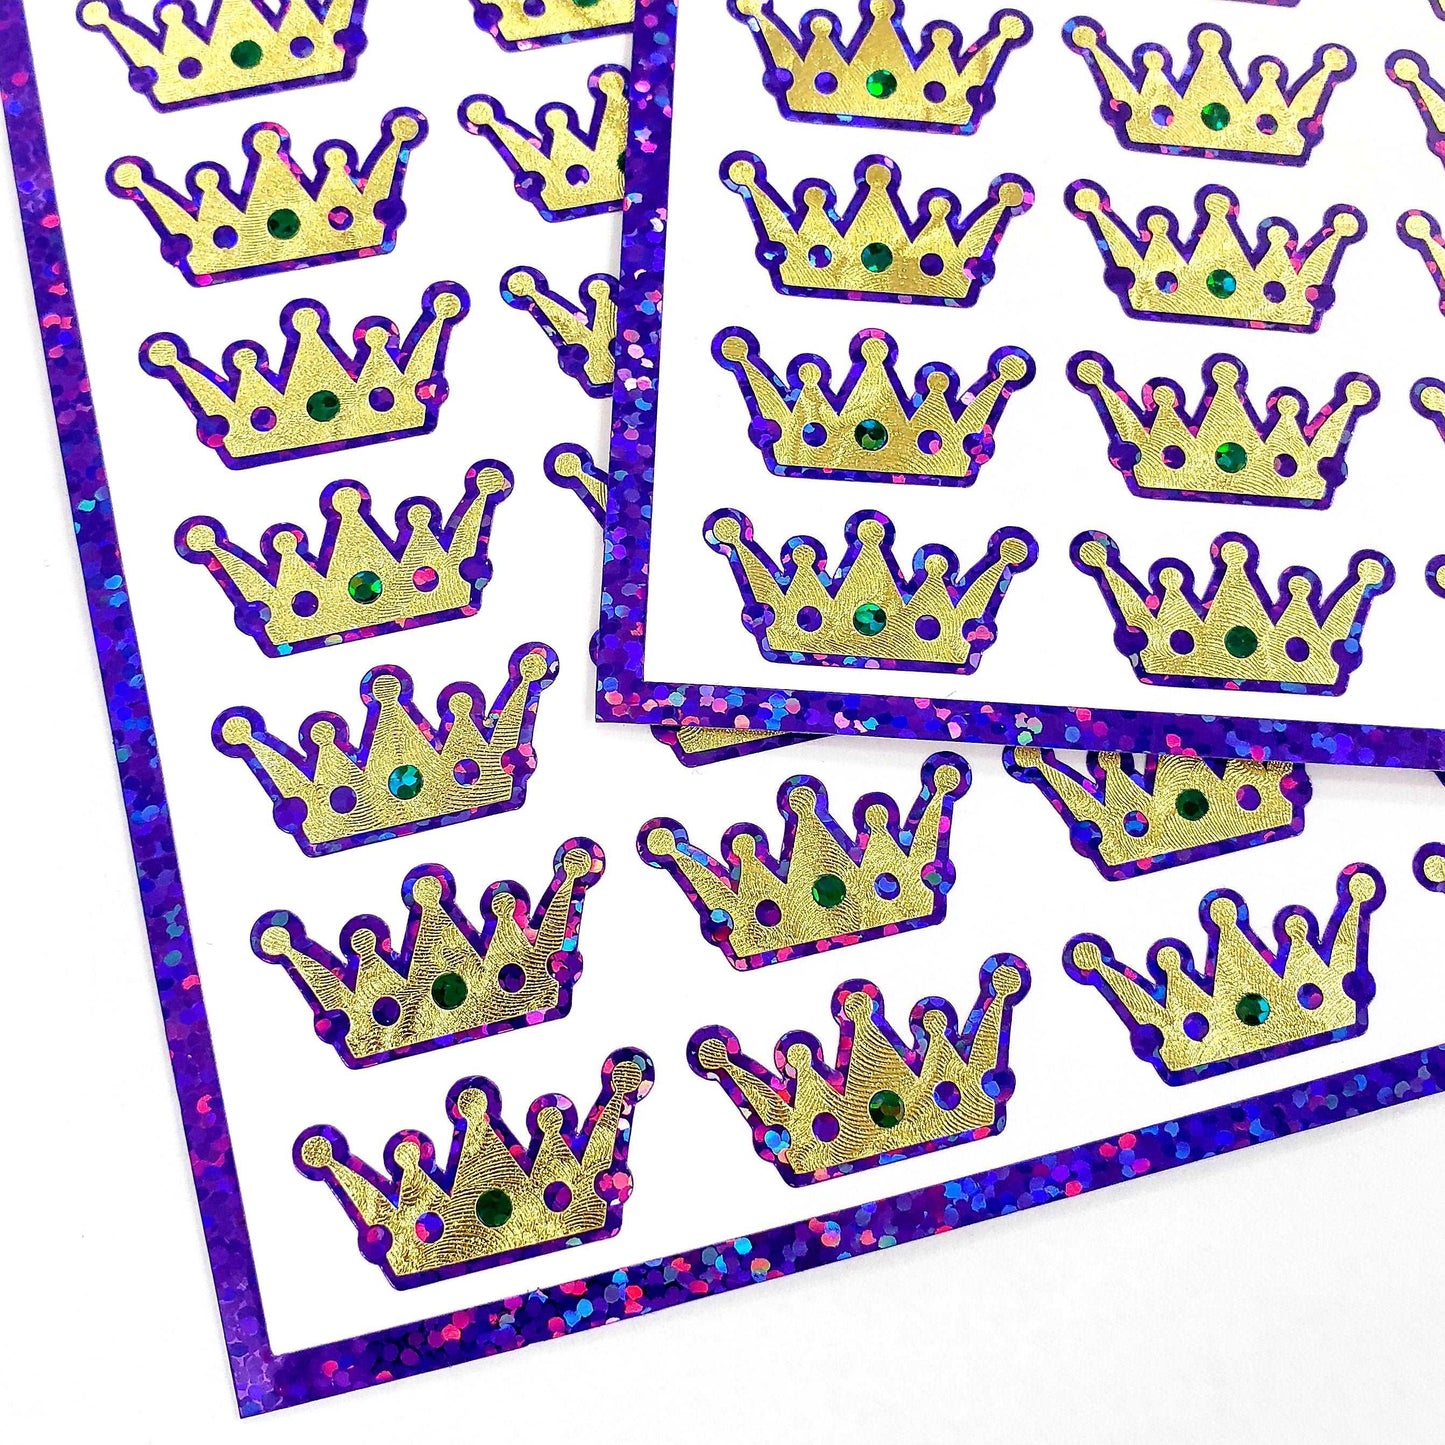 Mardi Gras Crown Stickers, set of 48 purple green and gold glitter stickers. Gold King crown stickers for Louisiana Fat Tuesday themed party